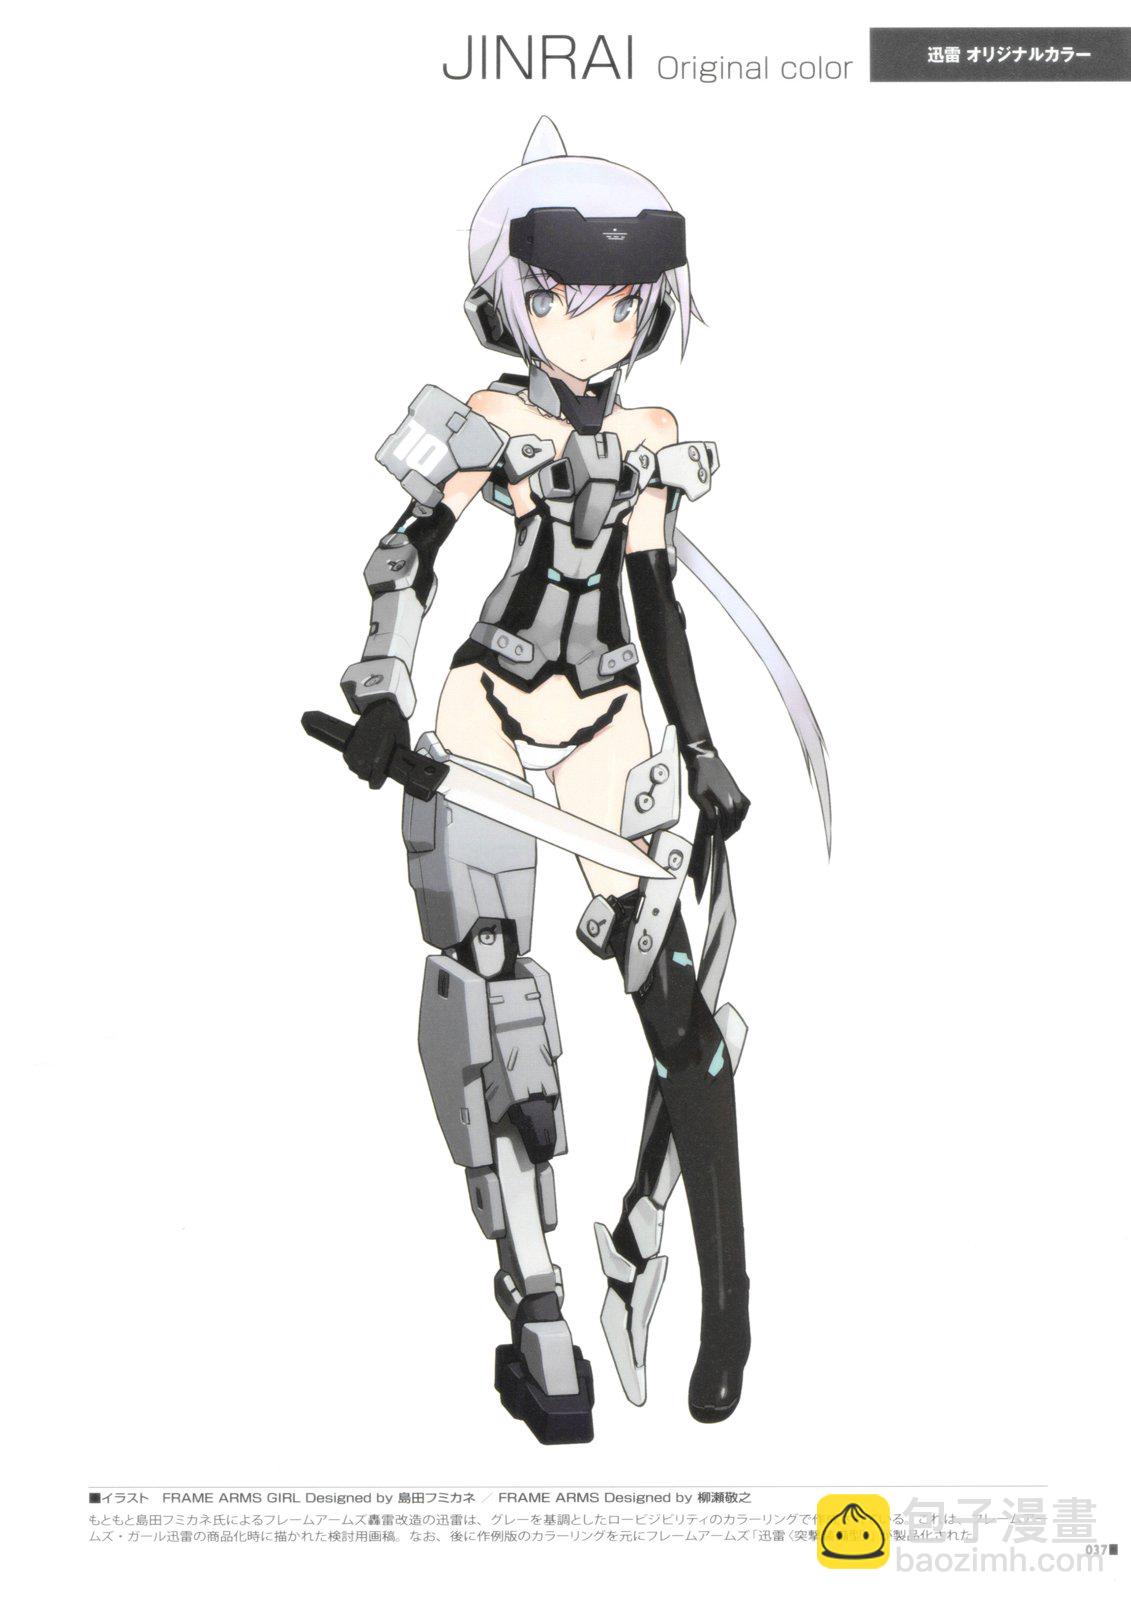 FRAME ARMS GIRL DESIGNERS NOTE - 全一卷(1/5) - 4